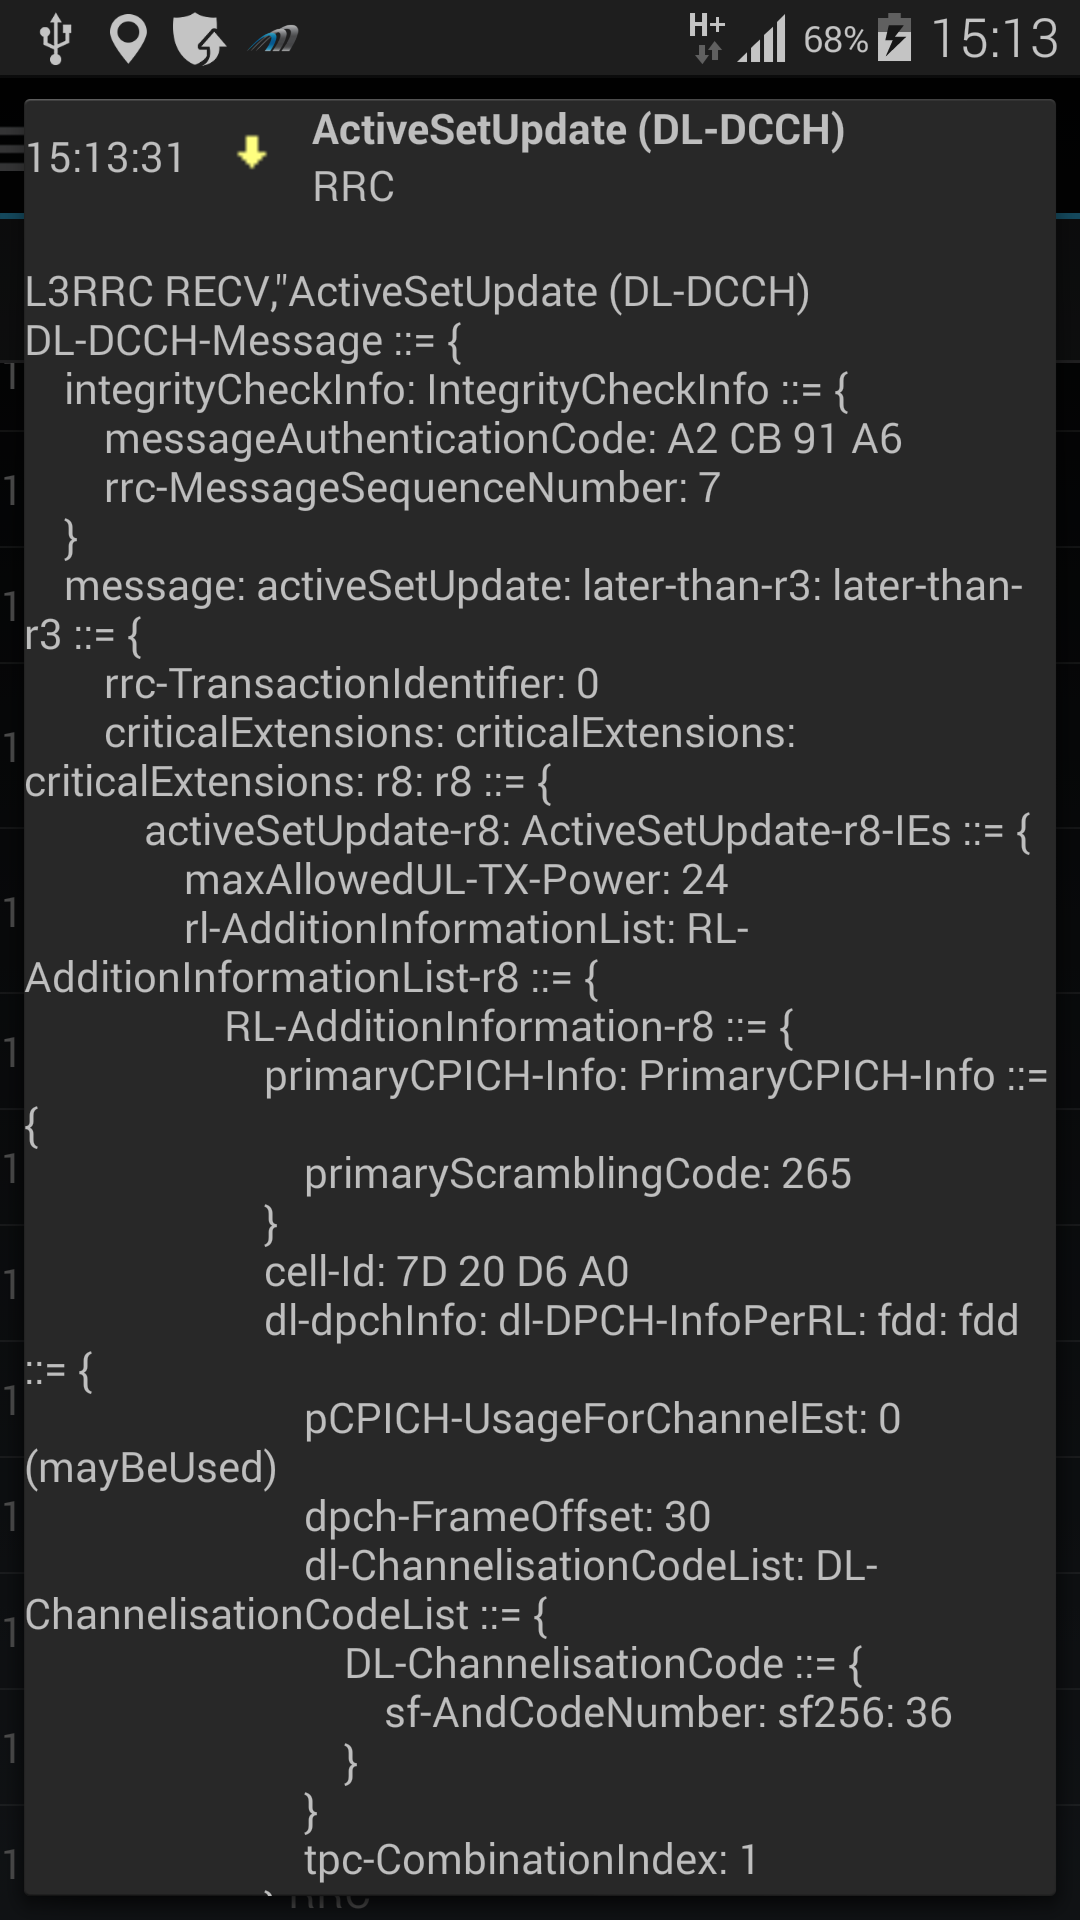 azq_s5_wcdma_l3_active_set_update_psc_addition(1).png